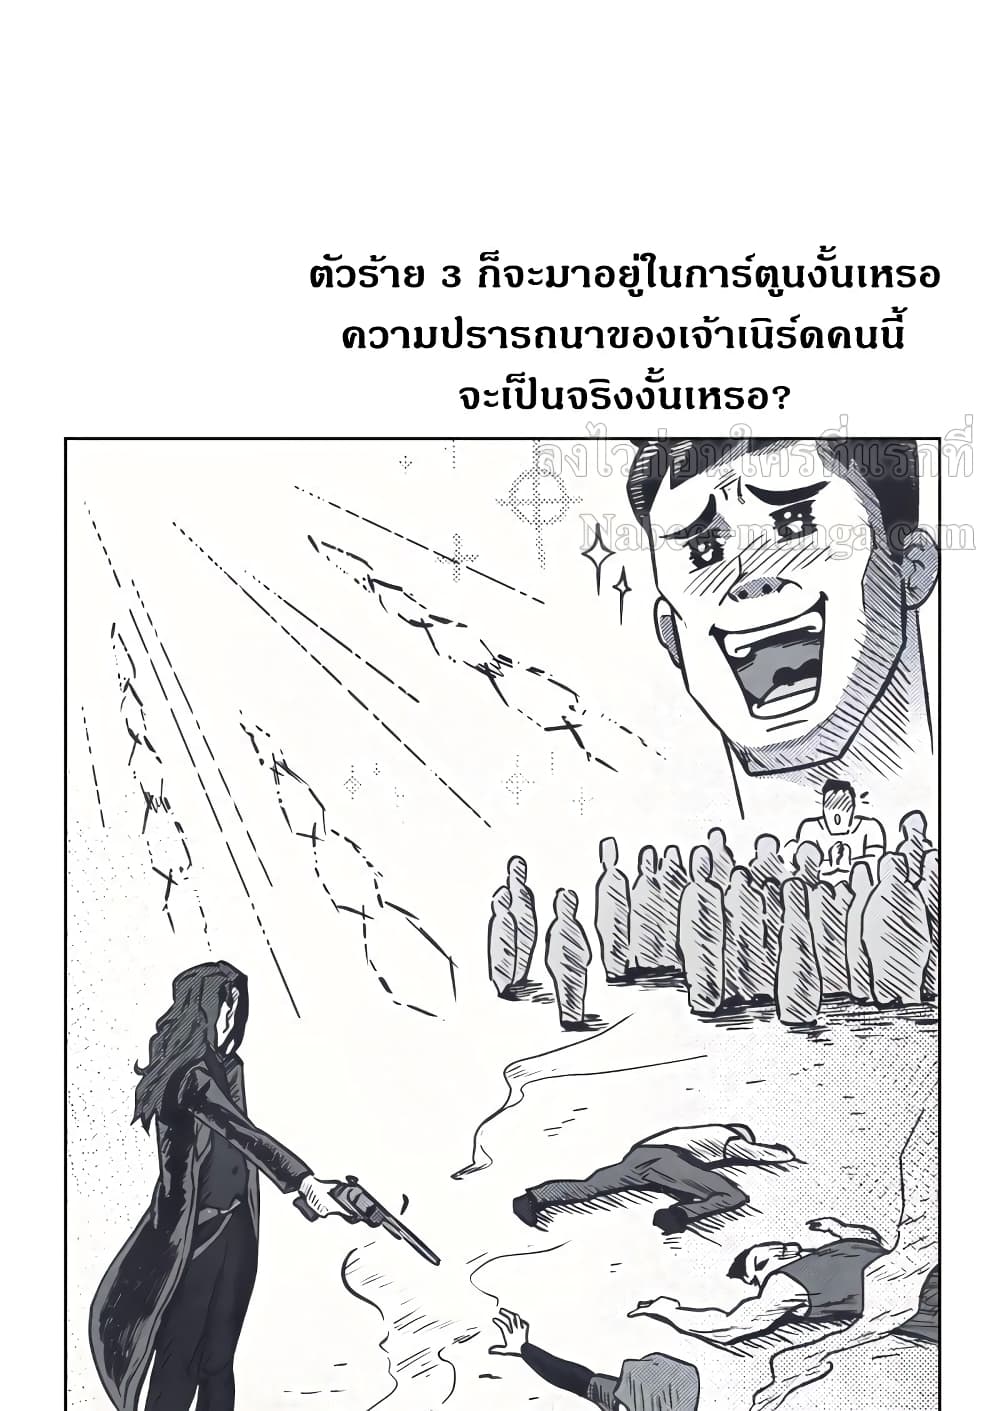 Surviving in an Action Manhwa ตอนที่ 4 (48)